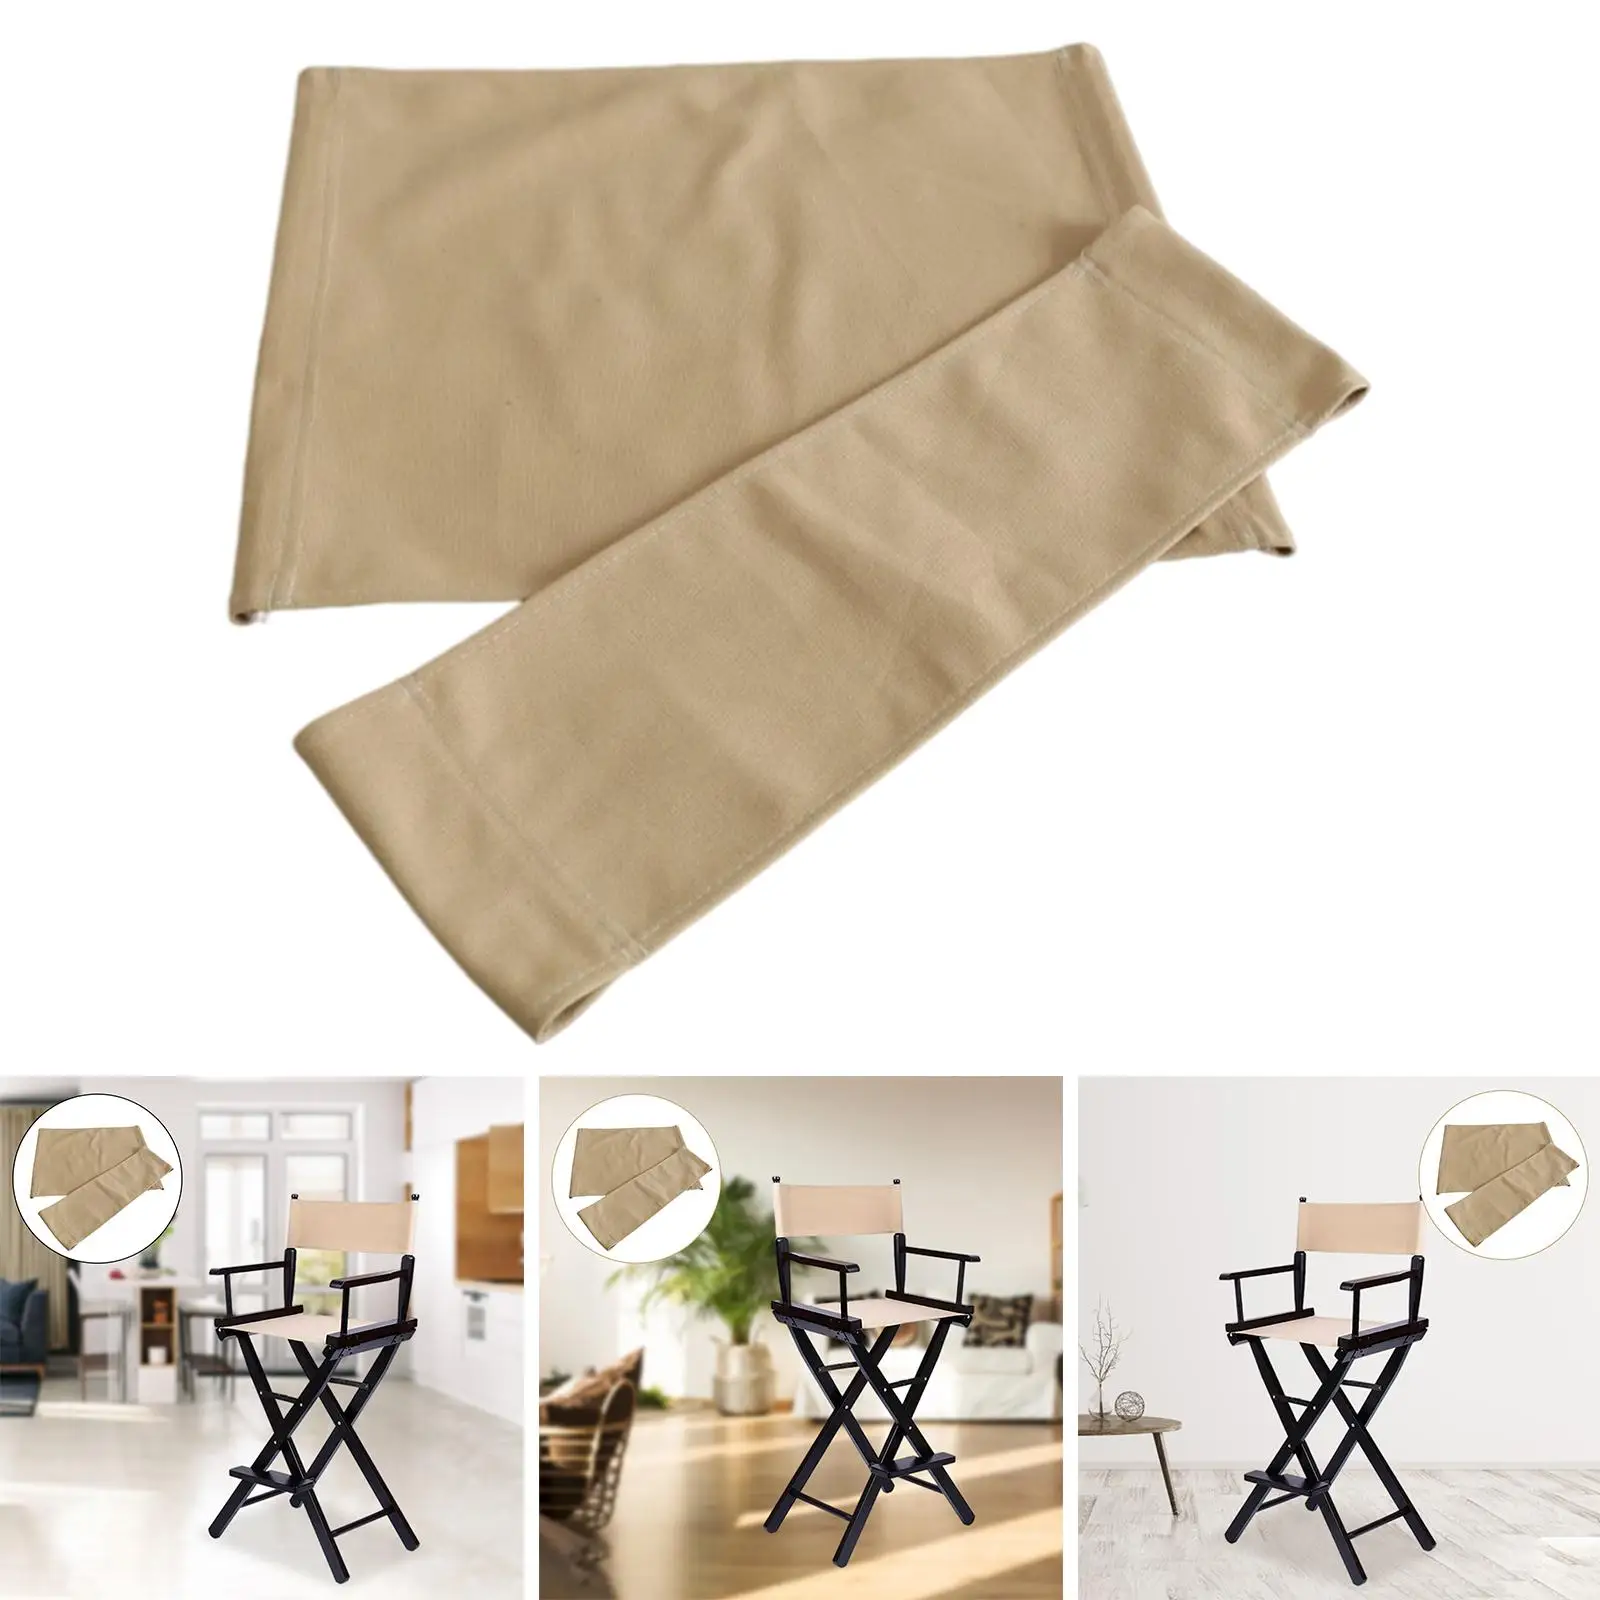 Outdoor Stool Protector Easy to Clean Patio Covers for Makeup Artist Chair Director Chair Movie Chair Cover Replacements